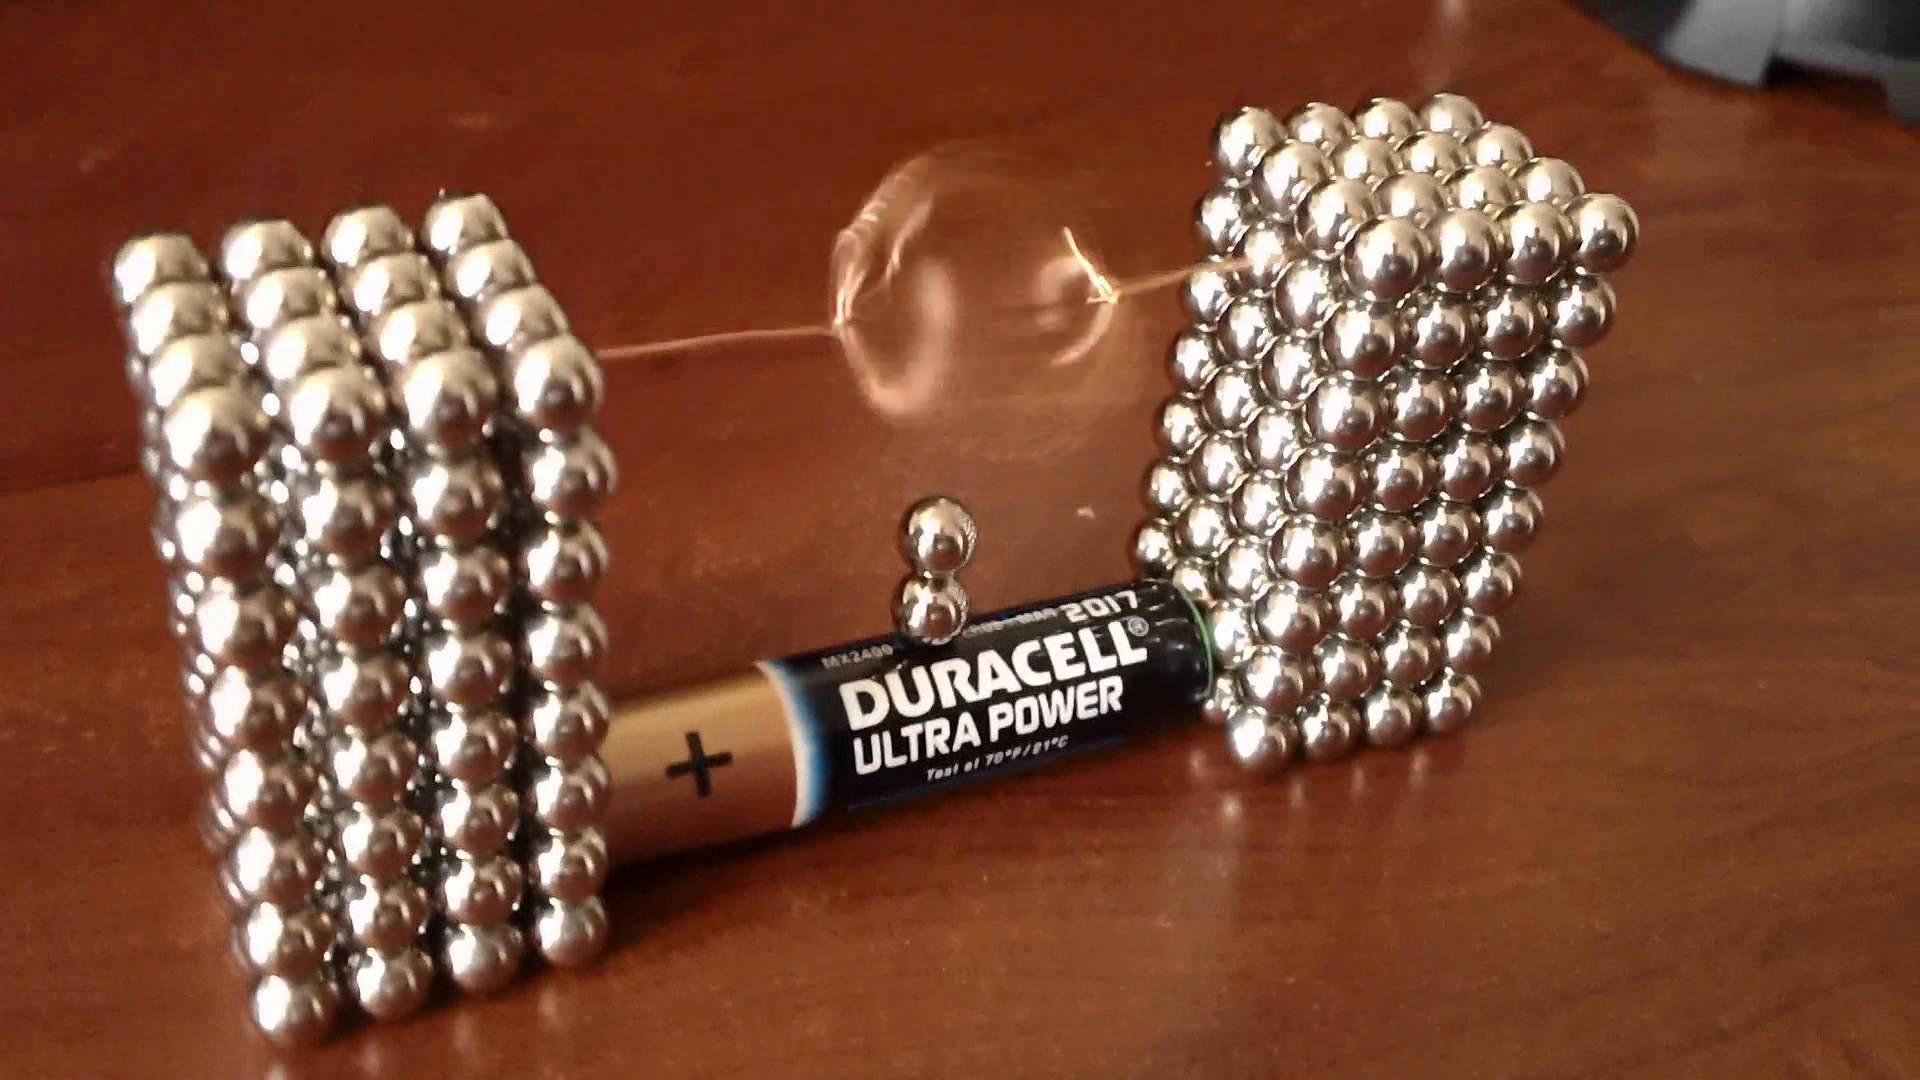 are buckyballs illegal to buy